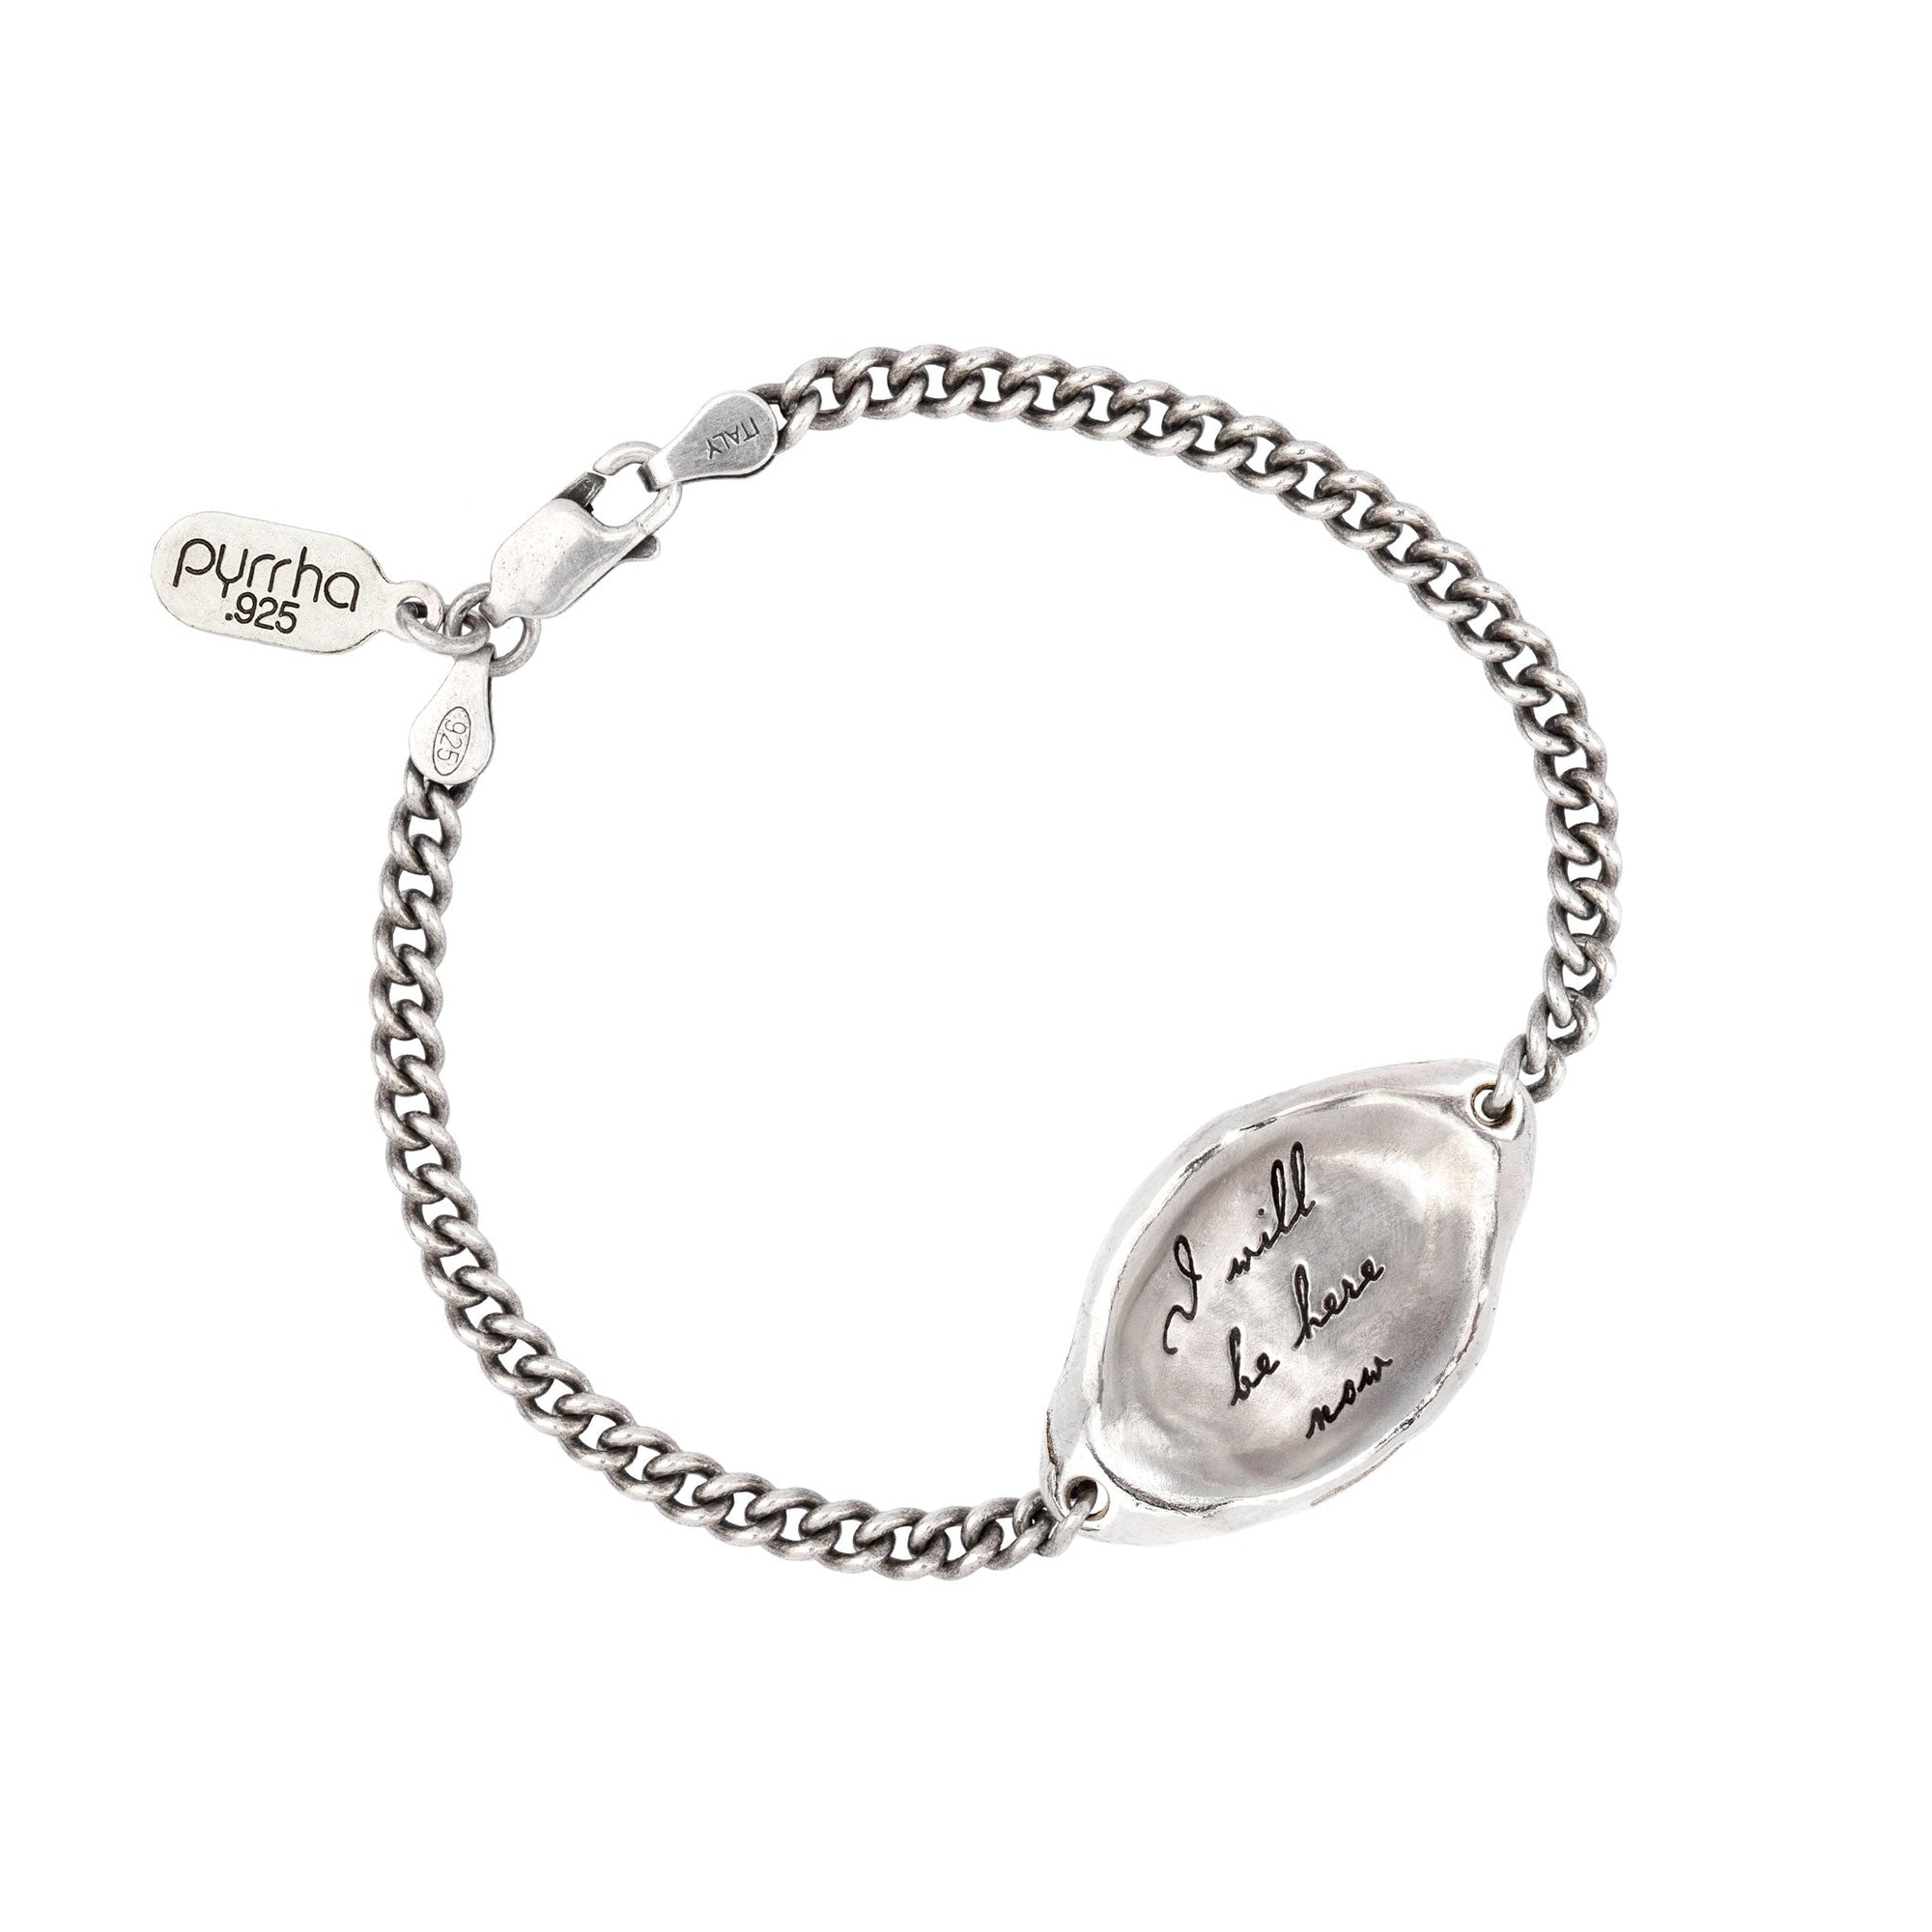 I Will Be Here Now Affirmation Talisman Chain Bracelet